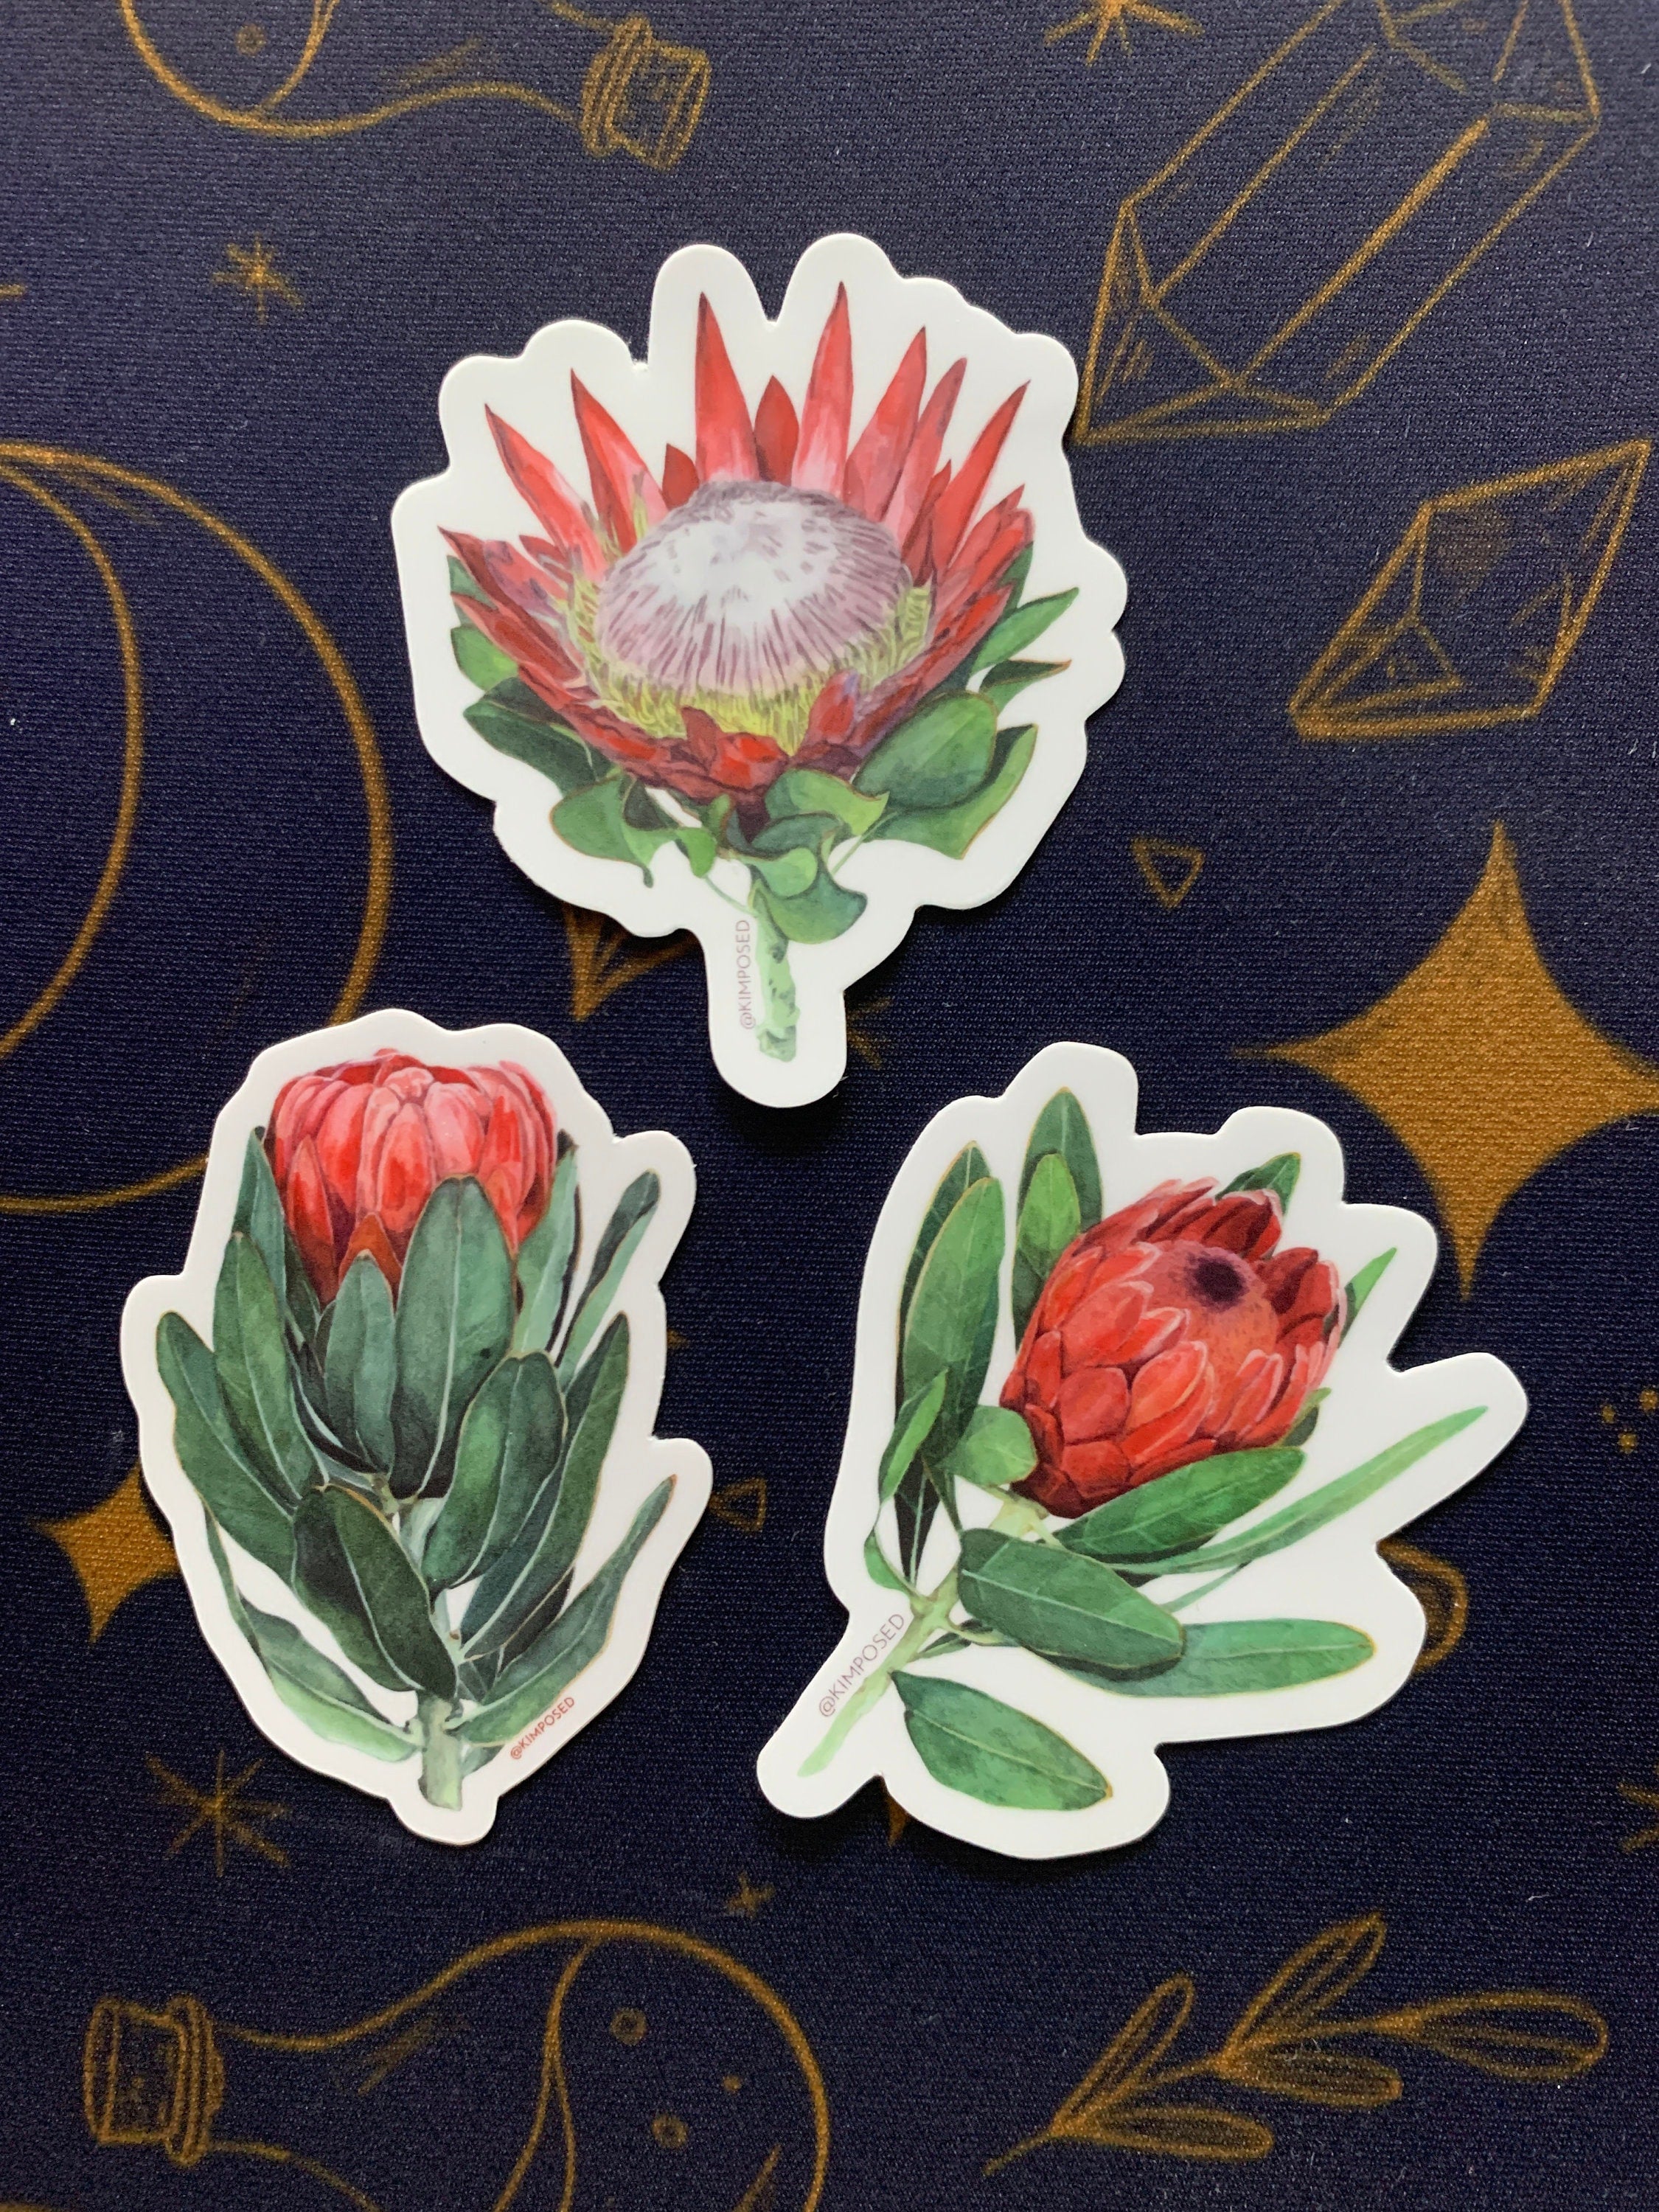 Protea Flower Trio Sticker Pack - Three 3" Waterproof Vinyl Stickers for Water Bottles, Laptops, Phones & More *FREE USA SHIPPING*